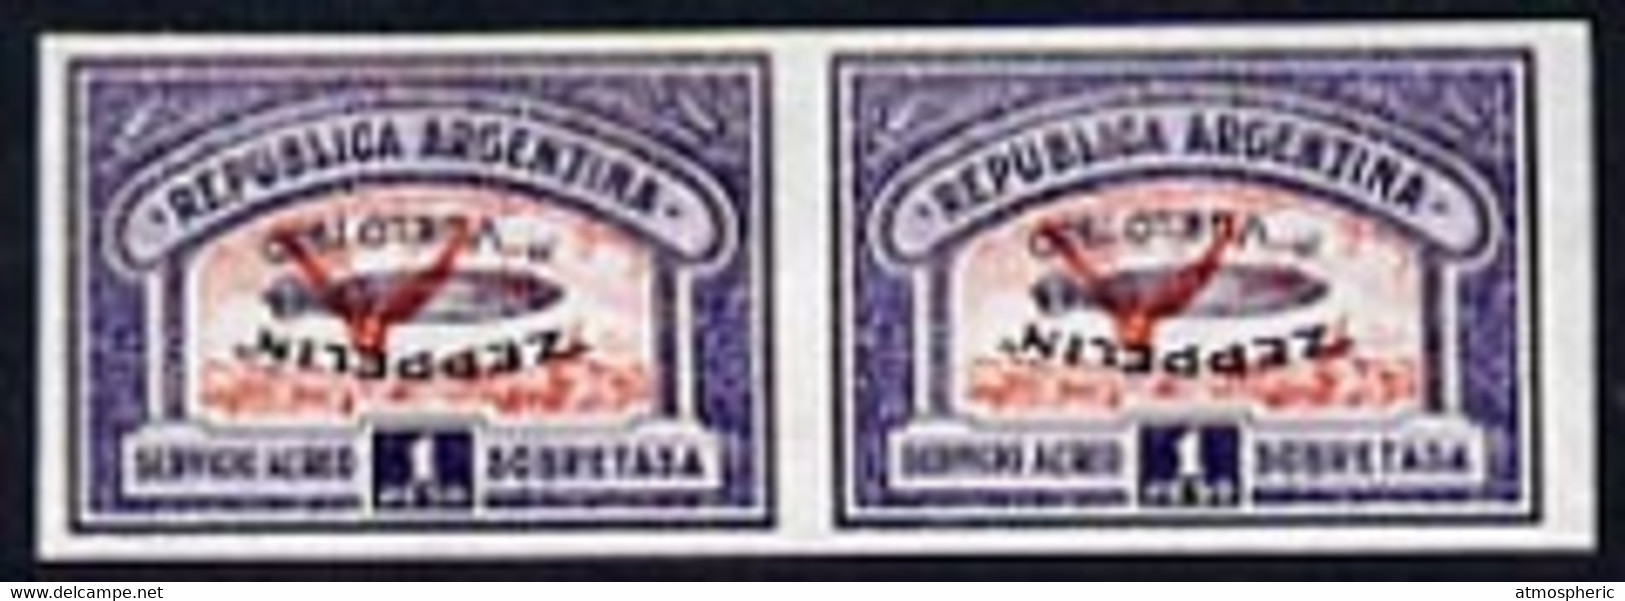 Argentine Republic 1930 Zeppelin Europe-Pan American Flight 1p With Opt Inverted, Imperf Pair Being A 'Hialeah' Reproduc - Nuevos